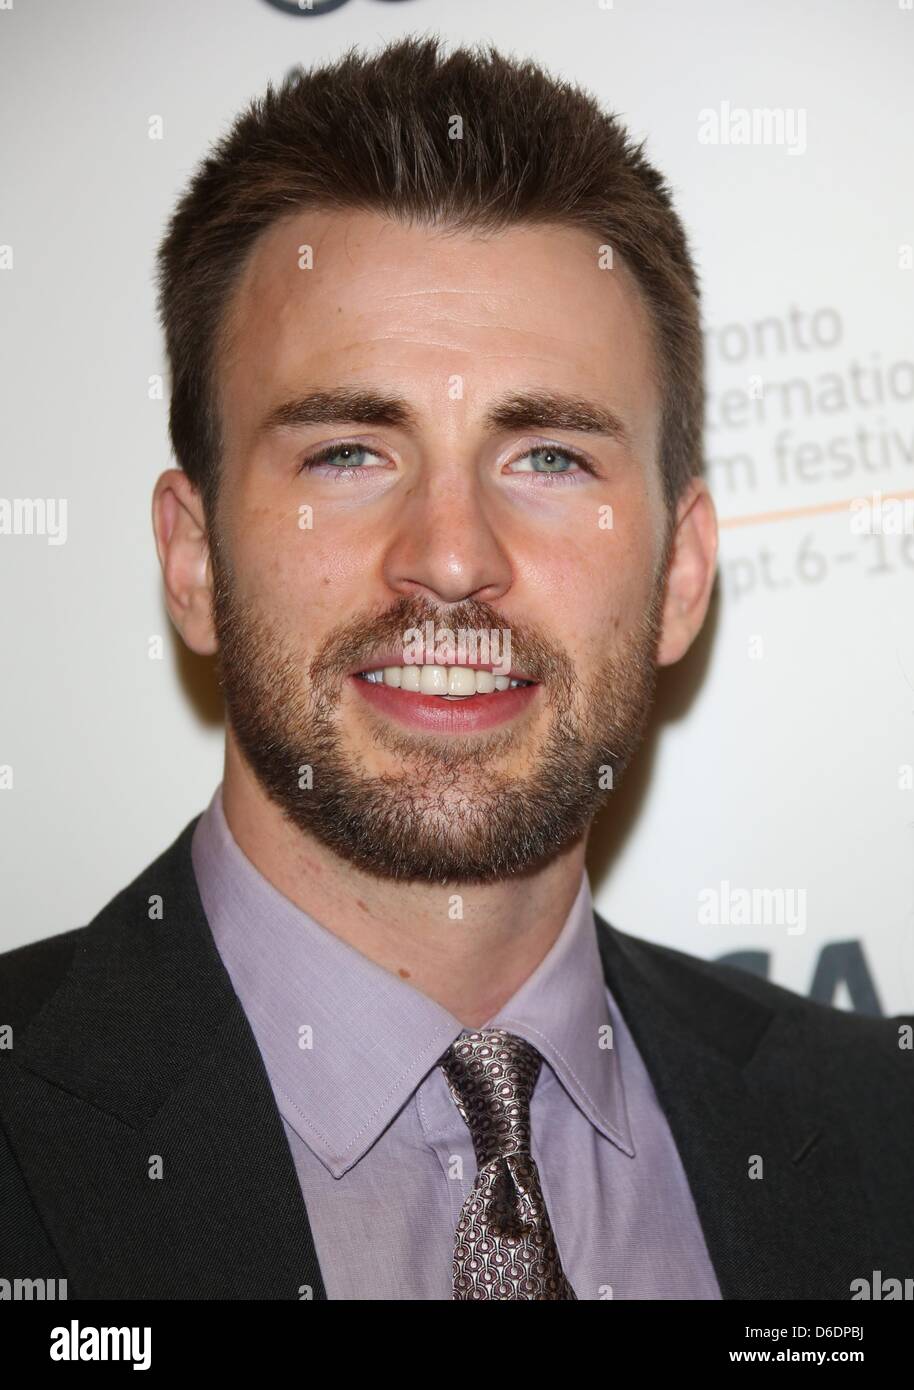 US actor Chris Evans arrives at the premiere of the movie 'Iceman' during the 37th annual Toronto International Film Festival in Toronto, Canada, 10 September 2012. The festival runs until 16 September 2012. Photo: Hubert Boesl Stock Photo